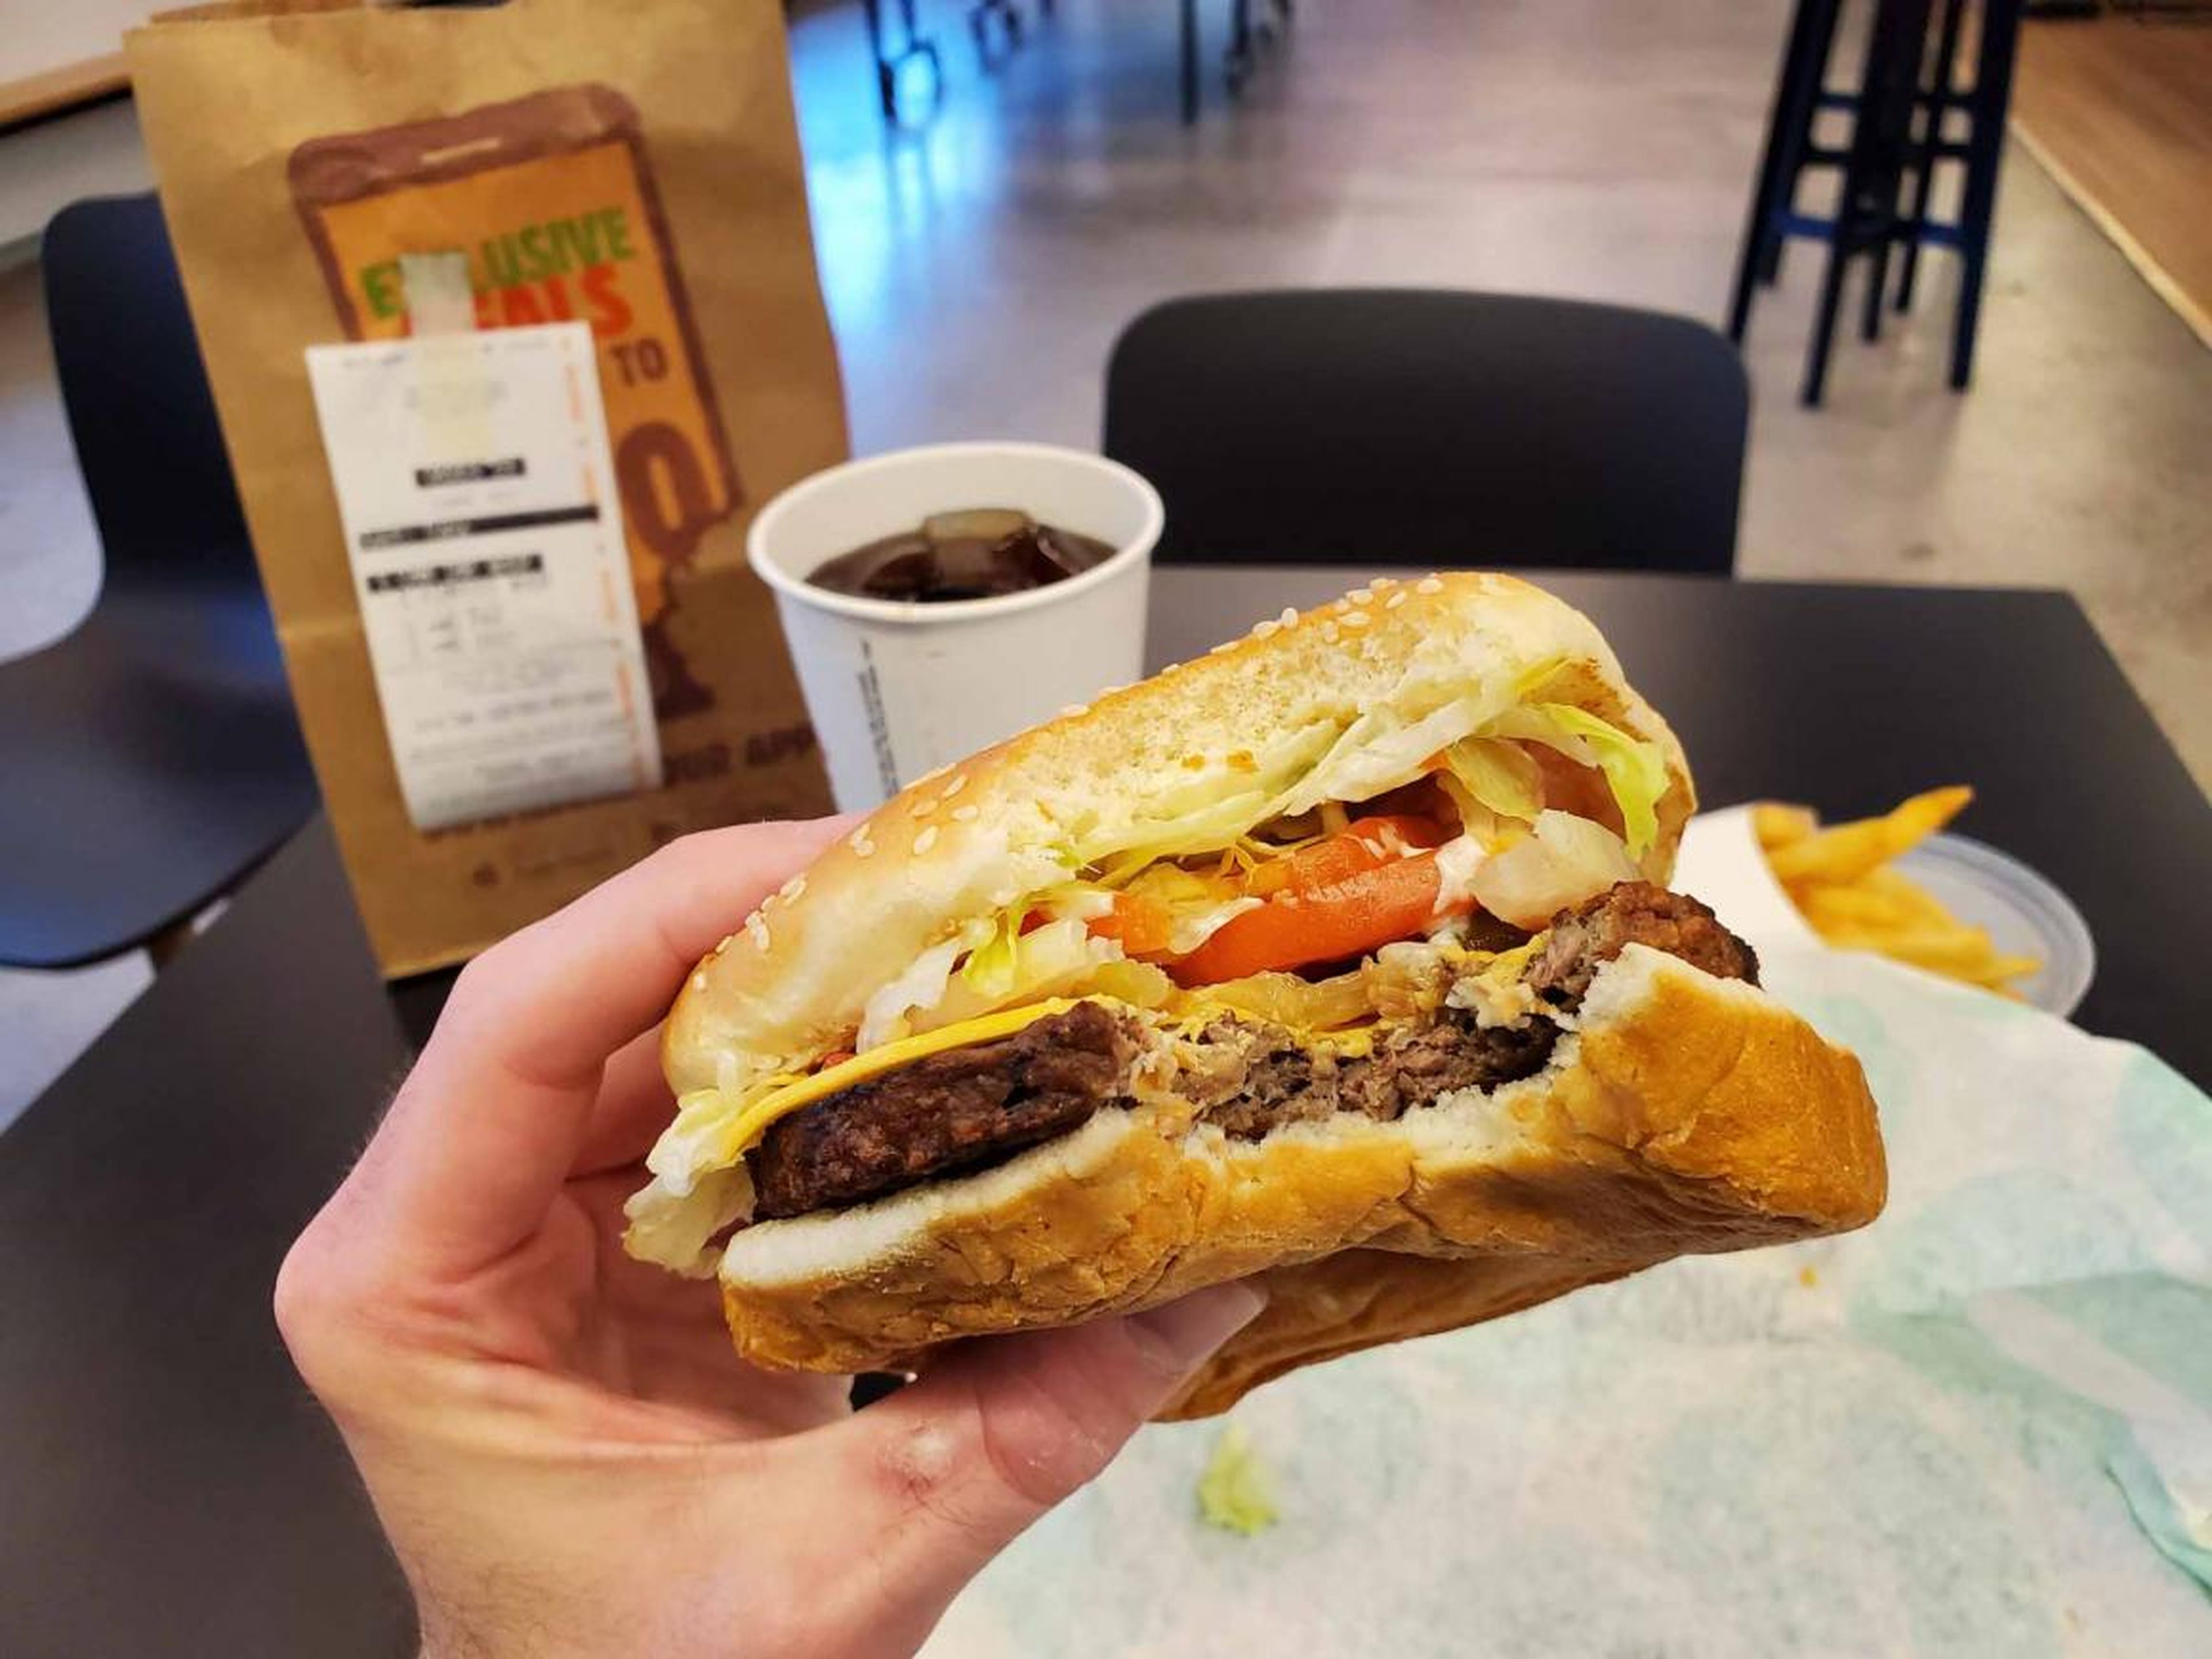 With little drama, I took the first bite. Despite an exterior that's nearly identical to a regular Whopper, it was clear the Impossible Whopper was different.